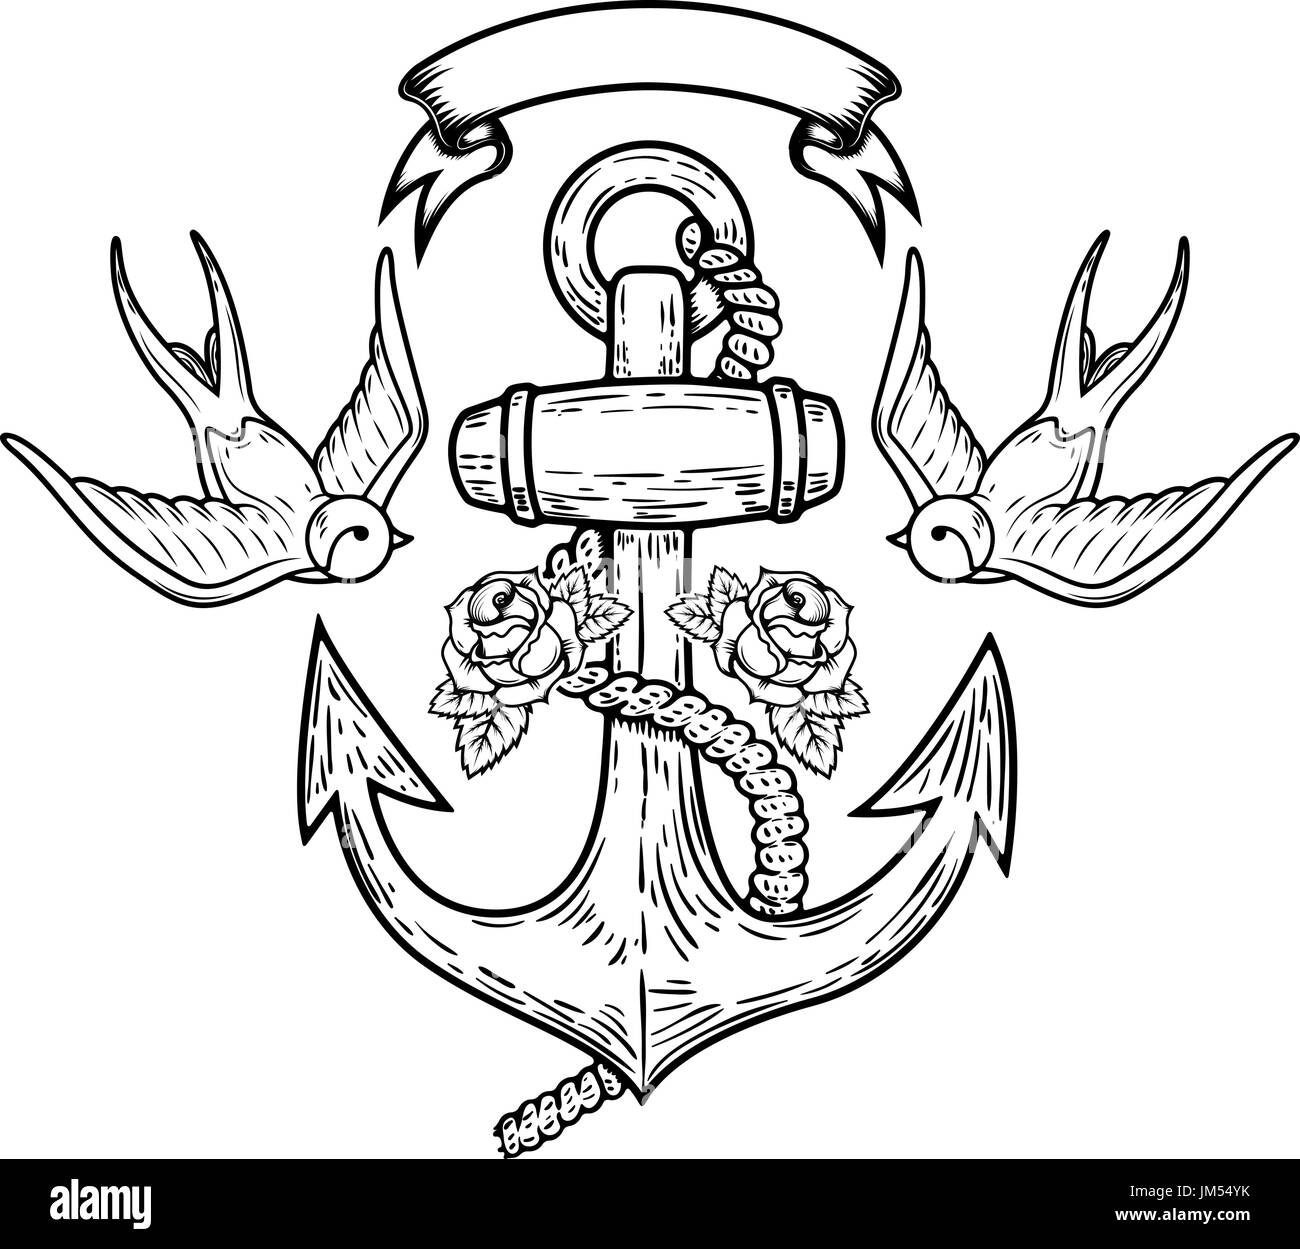 100 Appealing Anchor Tattoo Designs and Ideas For Men and Women